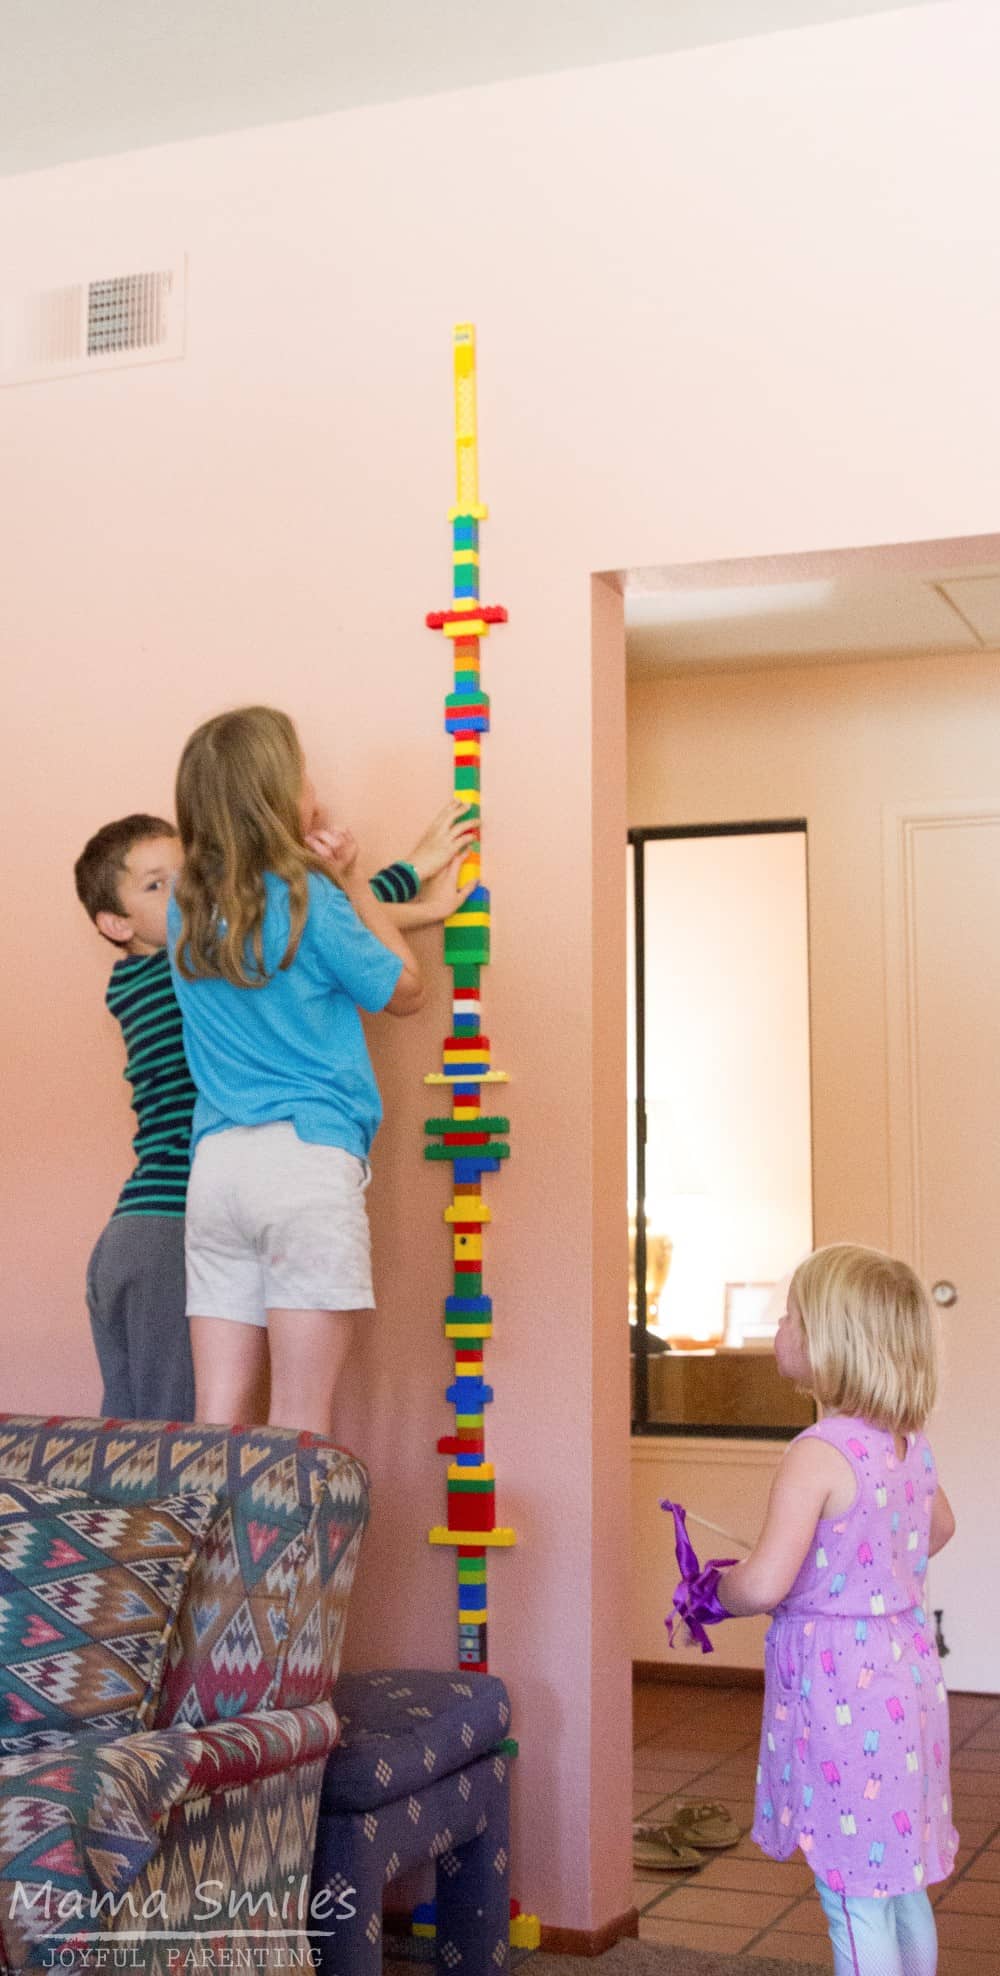 We build a tall tower out of DUPLO bricks at every birthday party we hold!